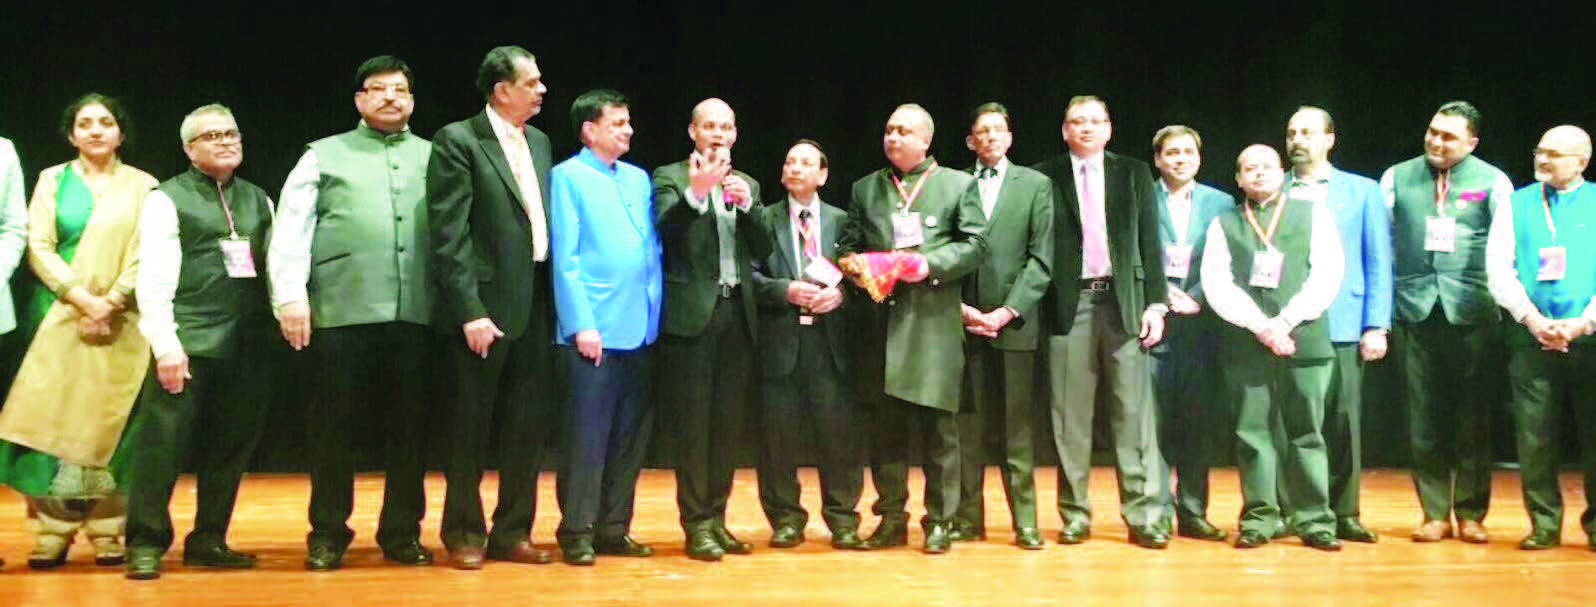 Deputy Consul General Dr. Manoj Kumar Mohapatra (10th from the right) administered the oath of office to new executive committee members of FIA